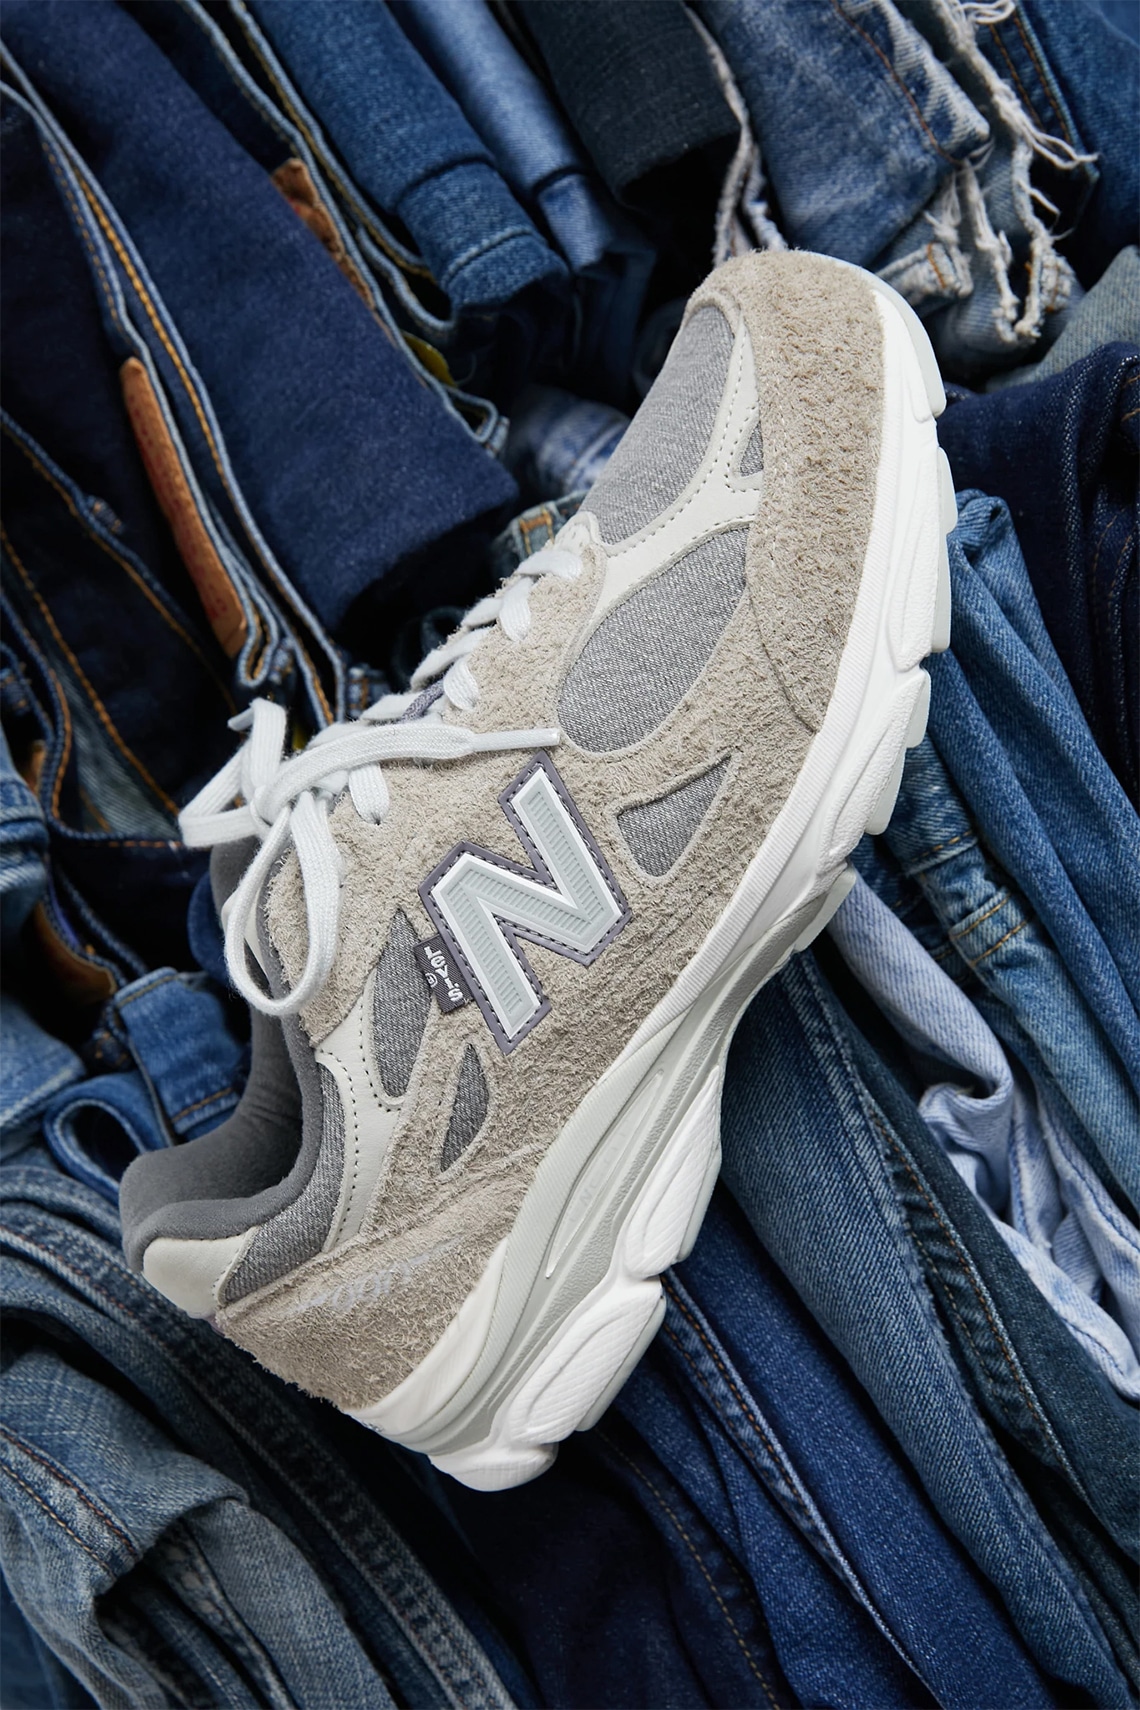 Levi's and New Balance Work on a 990v3 